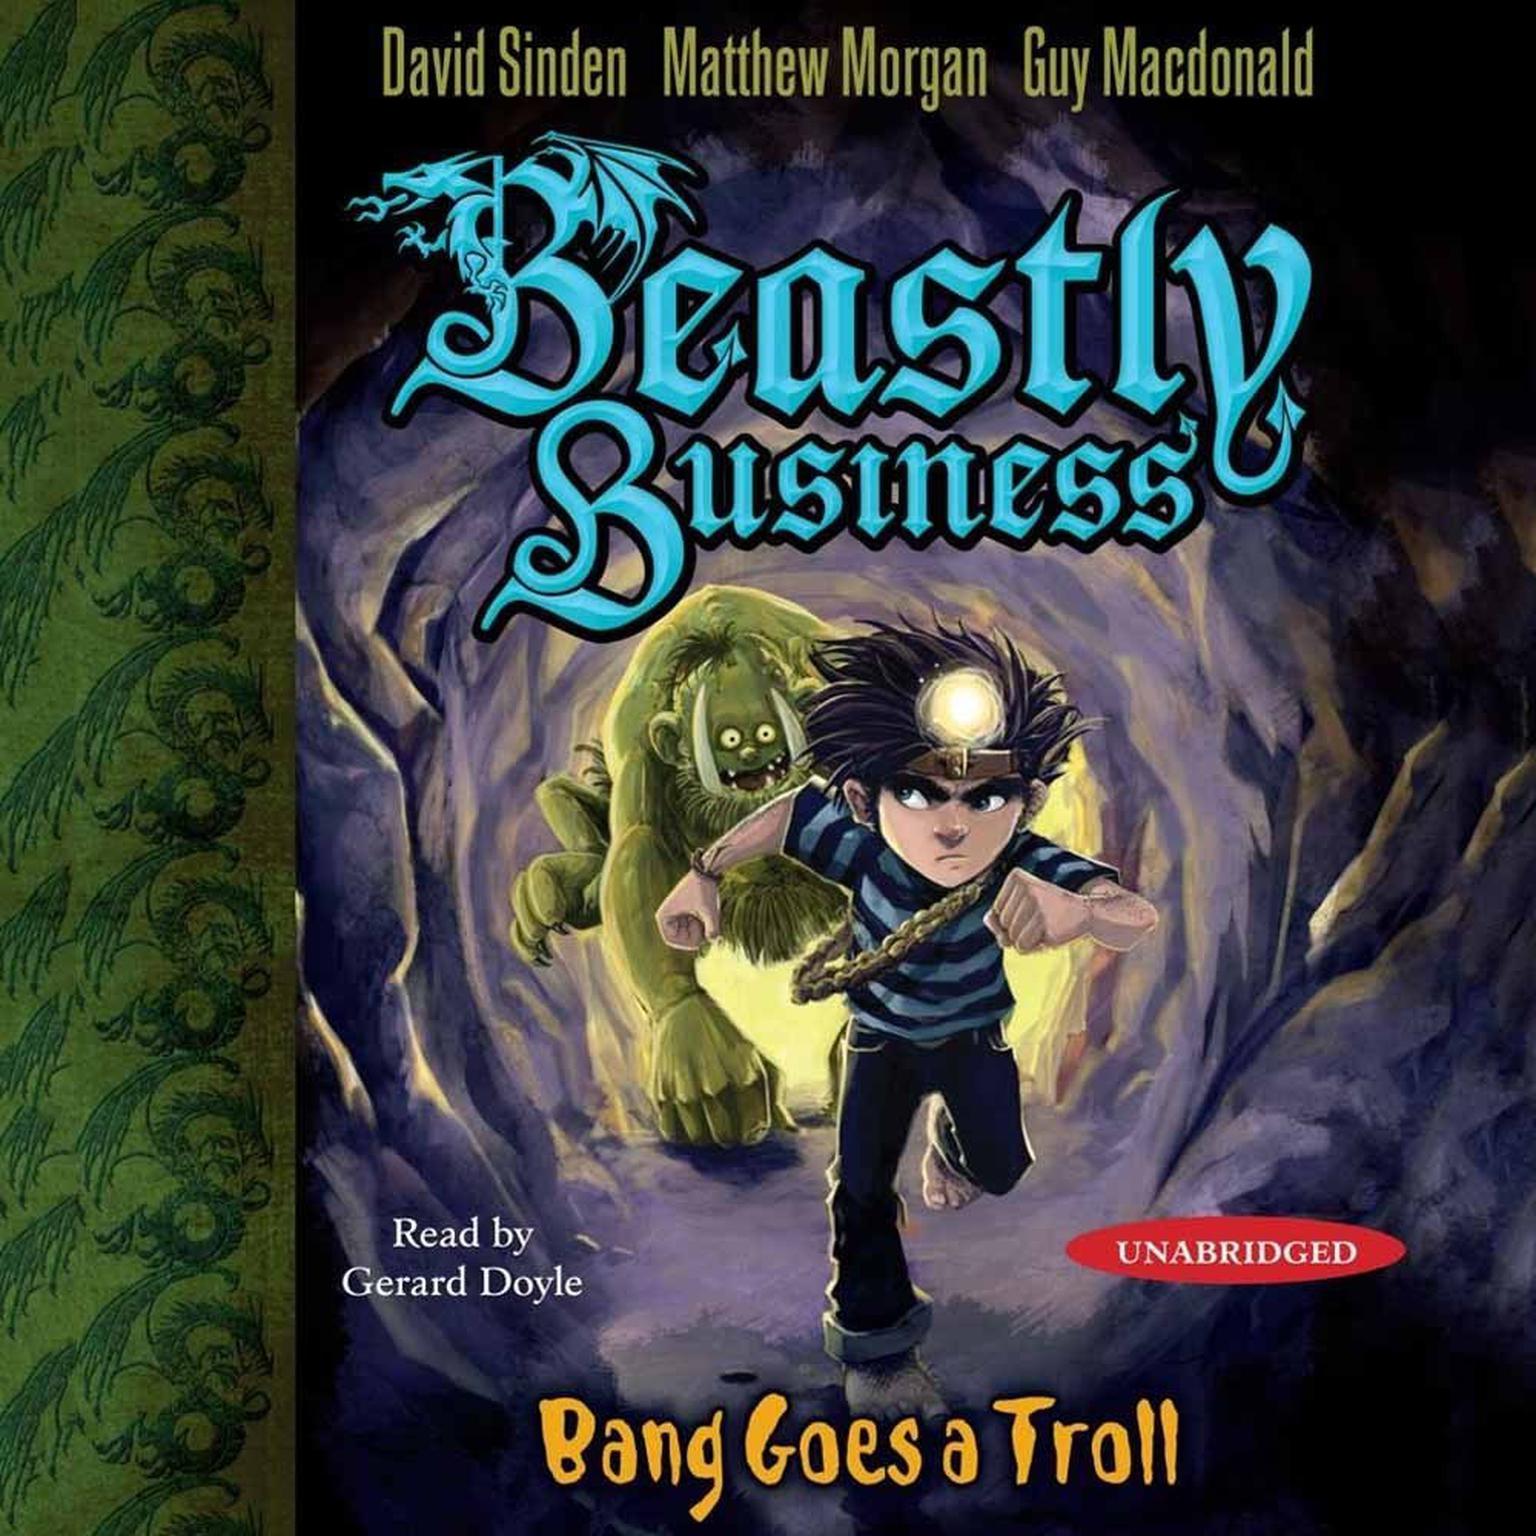 Bang Goes a Troll: An Awfully Beastly Business Audiobook, by David Sinden